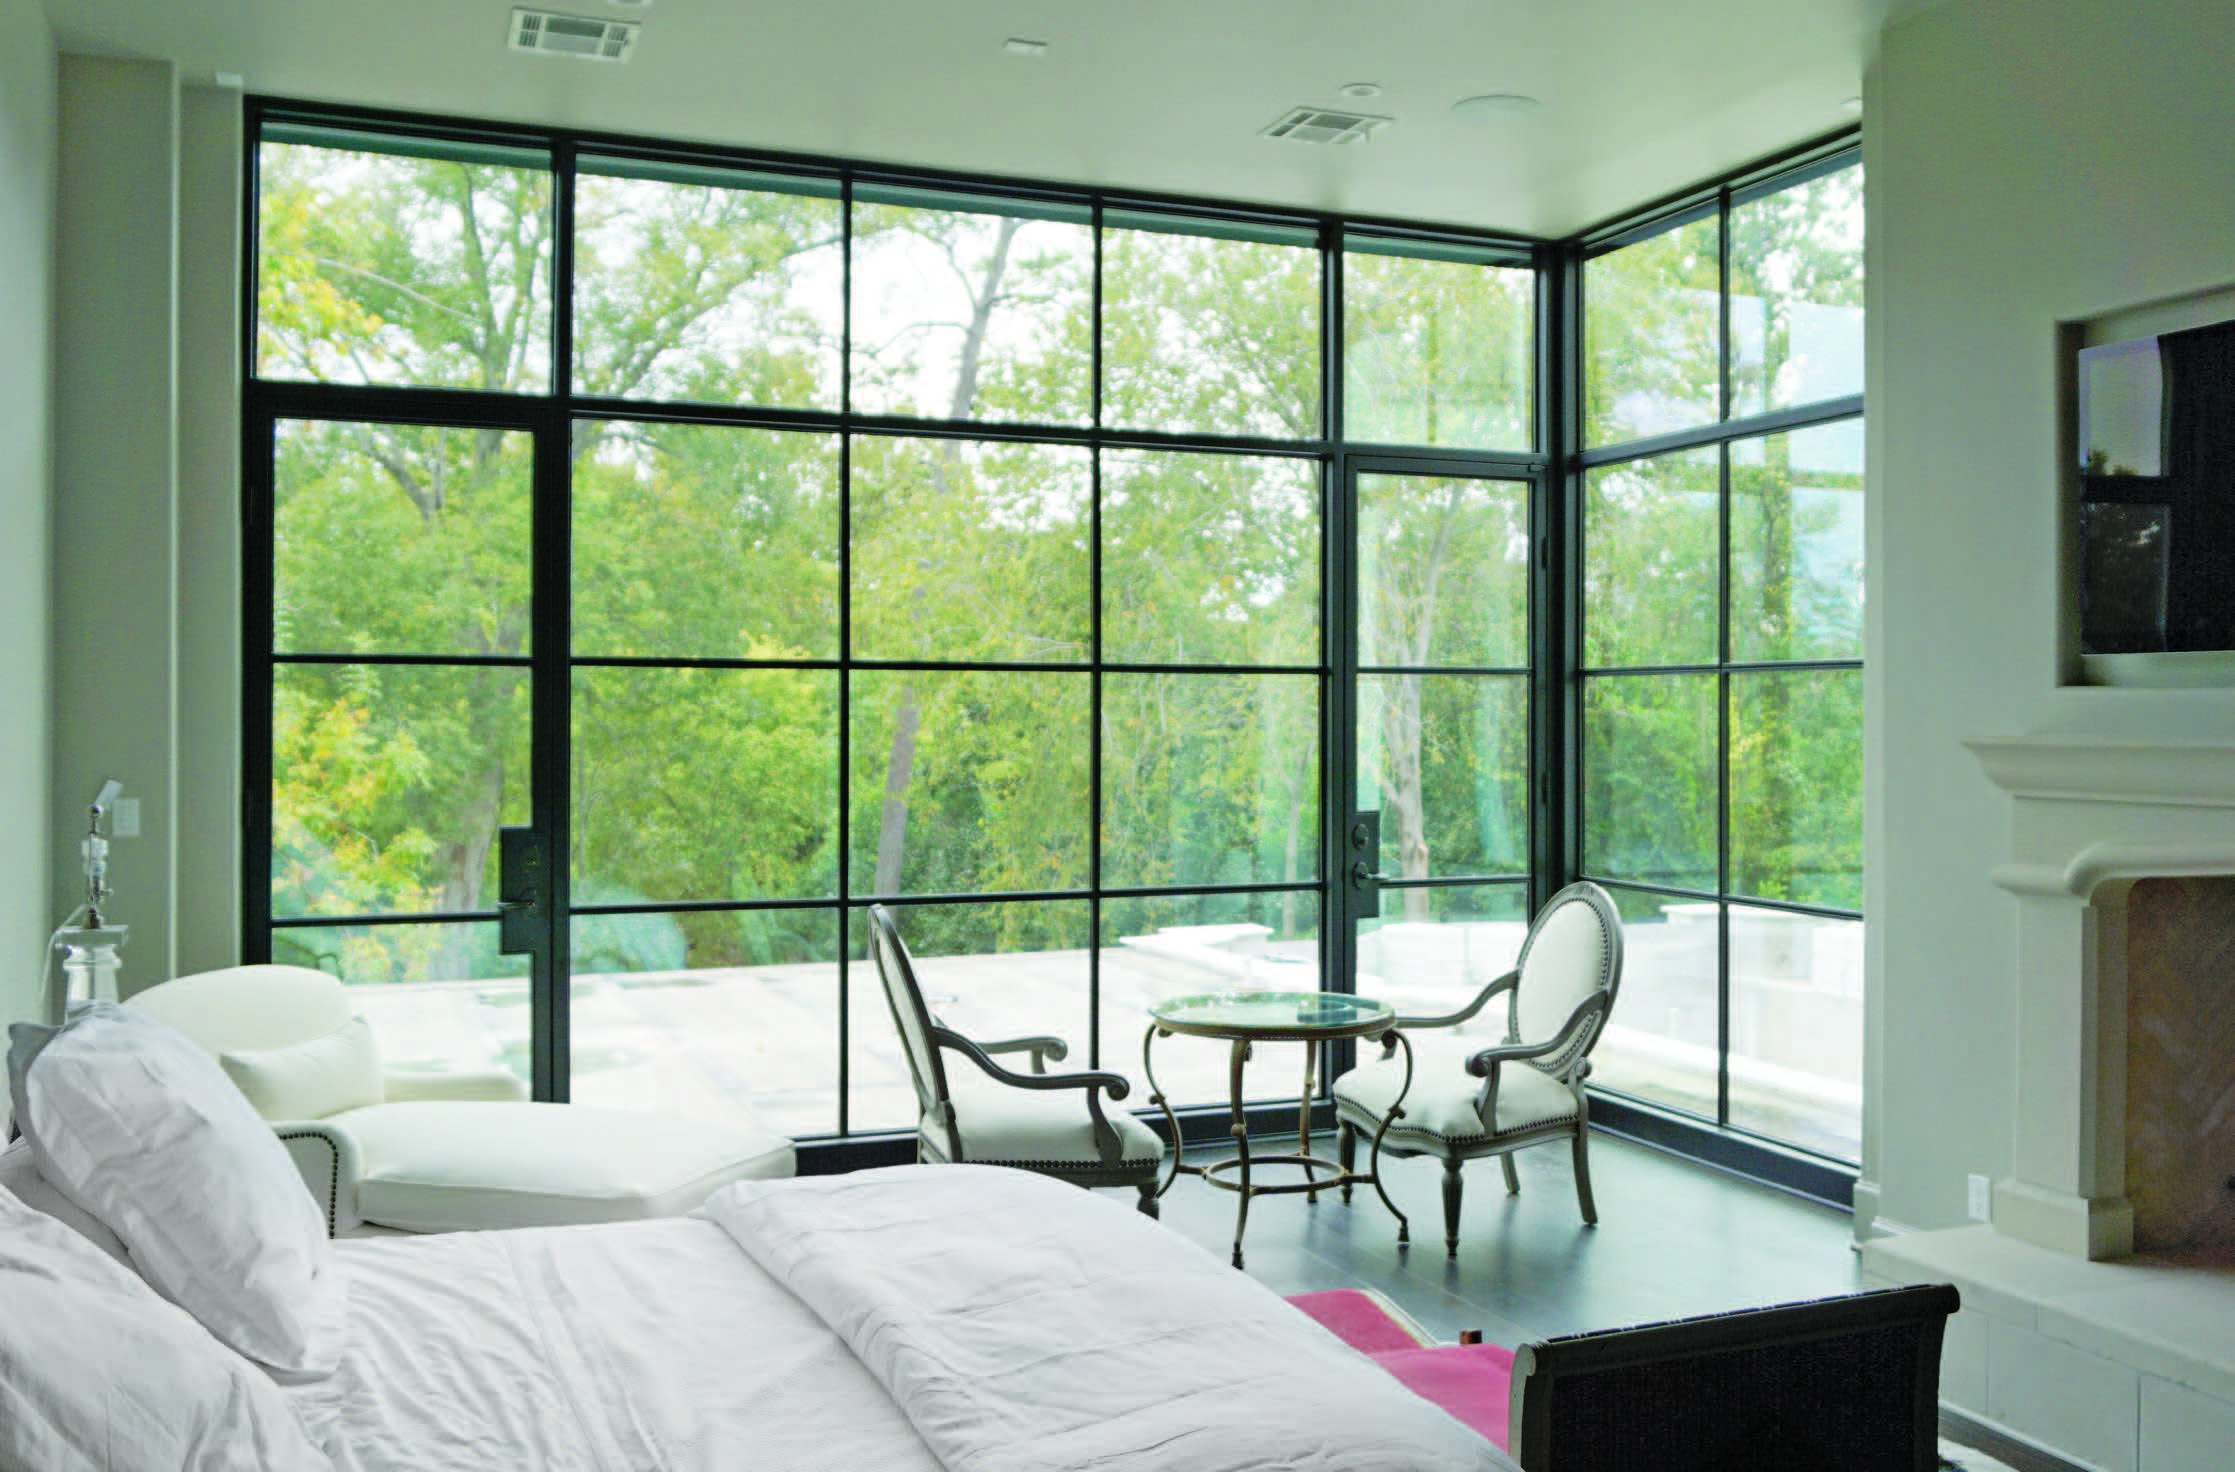 4 Benefits of Upgrading to New, Modern Windows